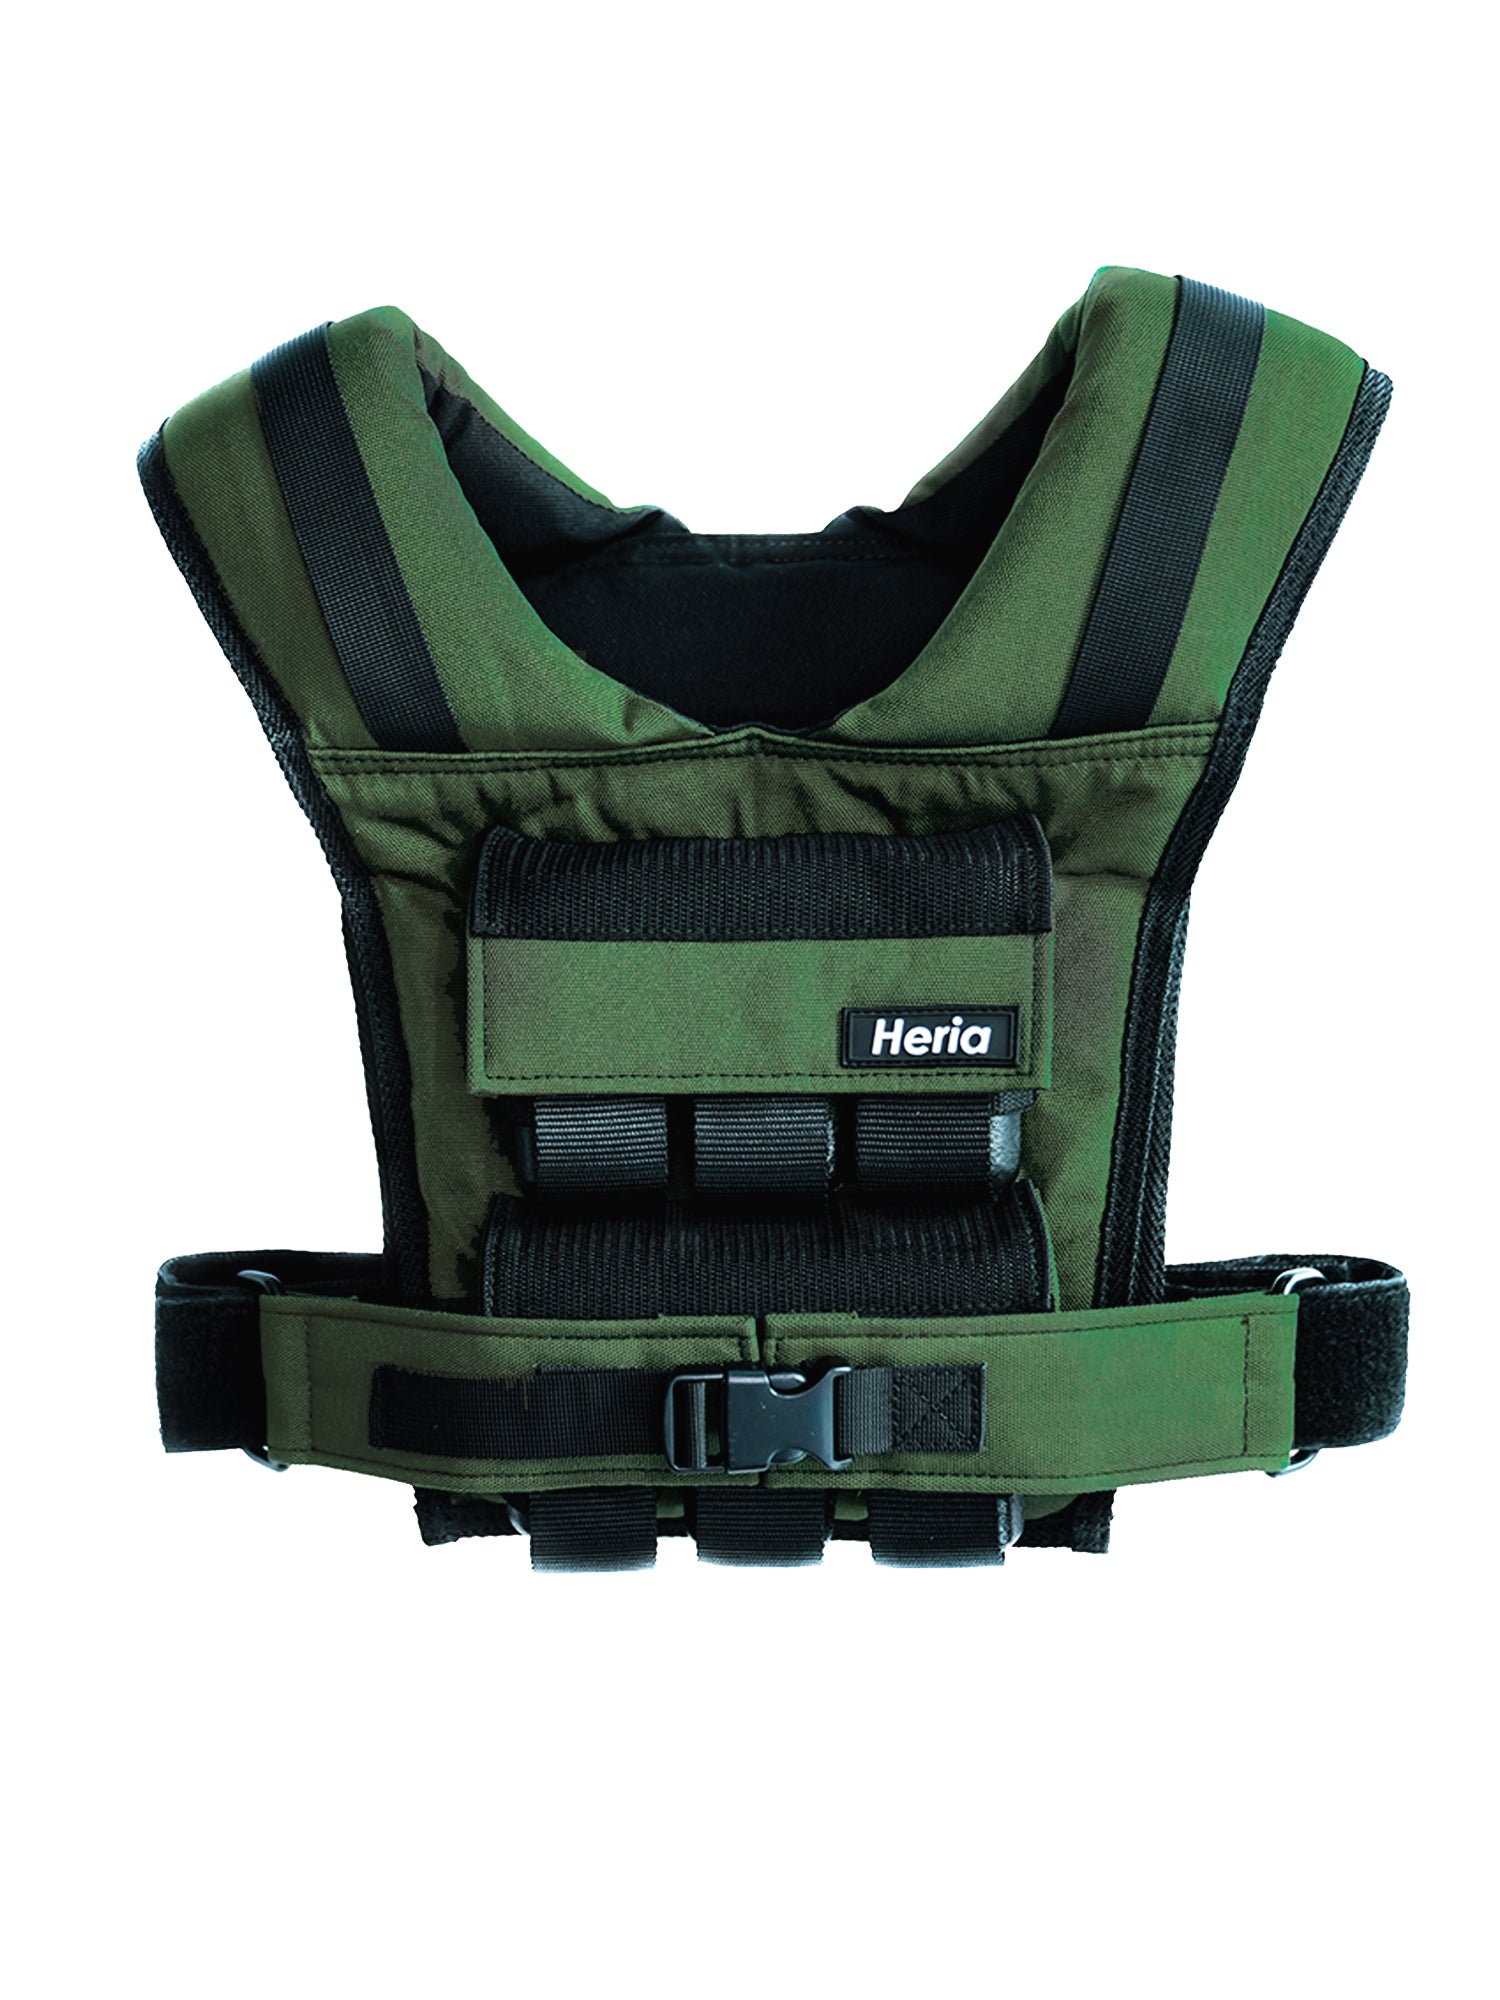 28LB Weight Vest - Forest Green (4686261747754)